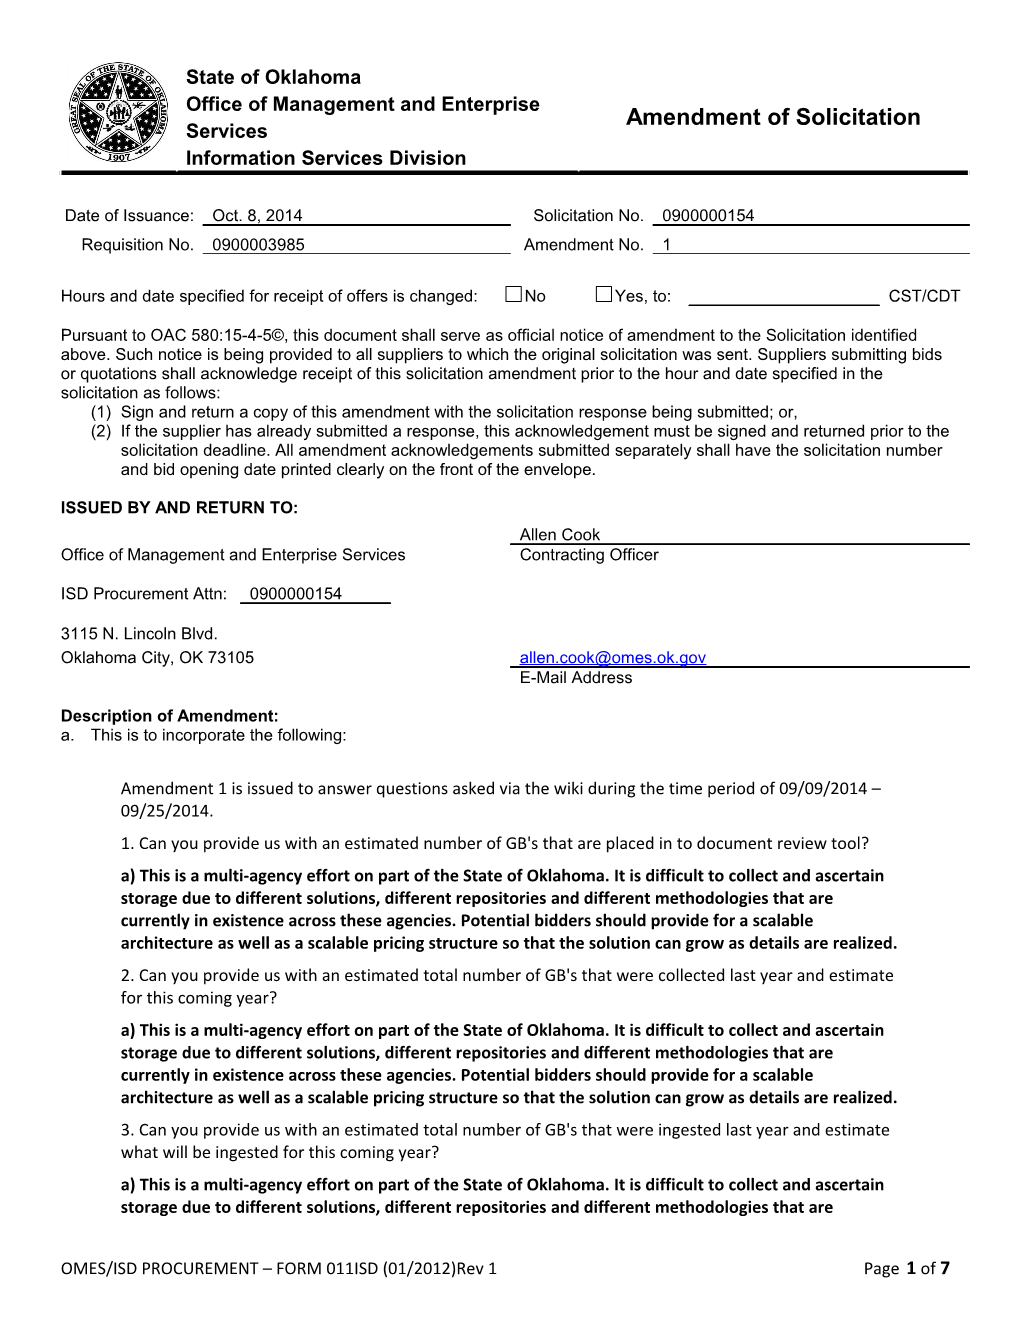 (1)Sign and Return a Copy of This Amendment with the Solicitation Response Being Submitted; Or